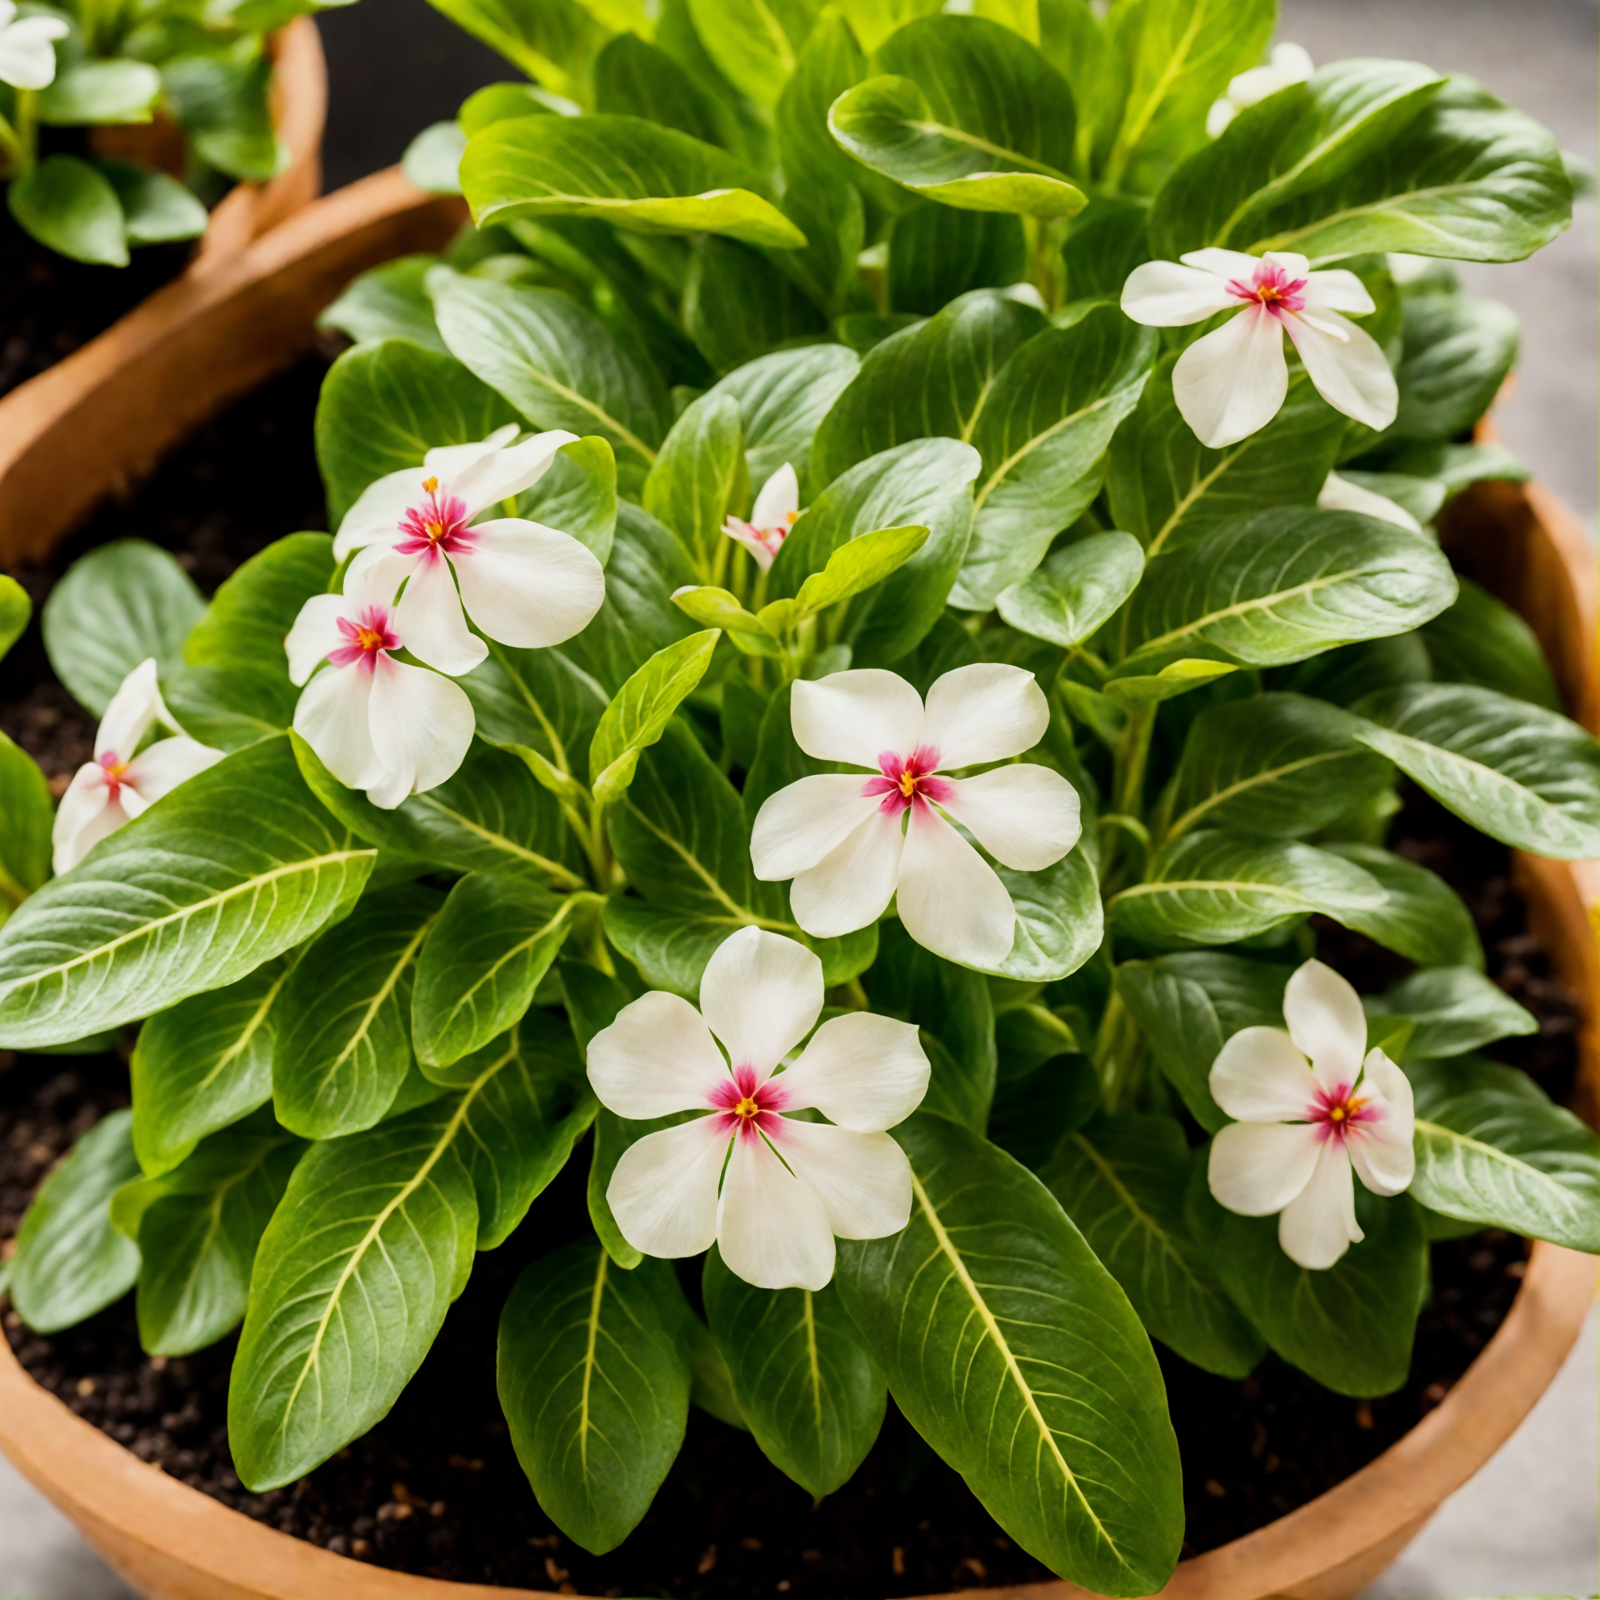 Potted Catharanthus roseus with white flowers, clear lighting, against a dark background.